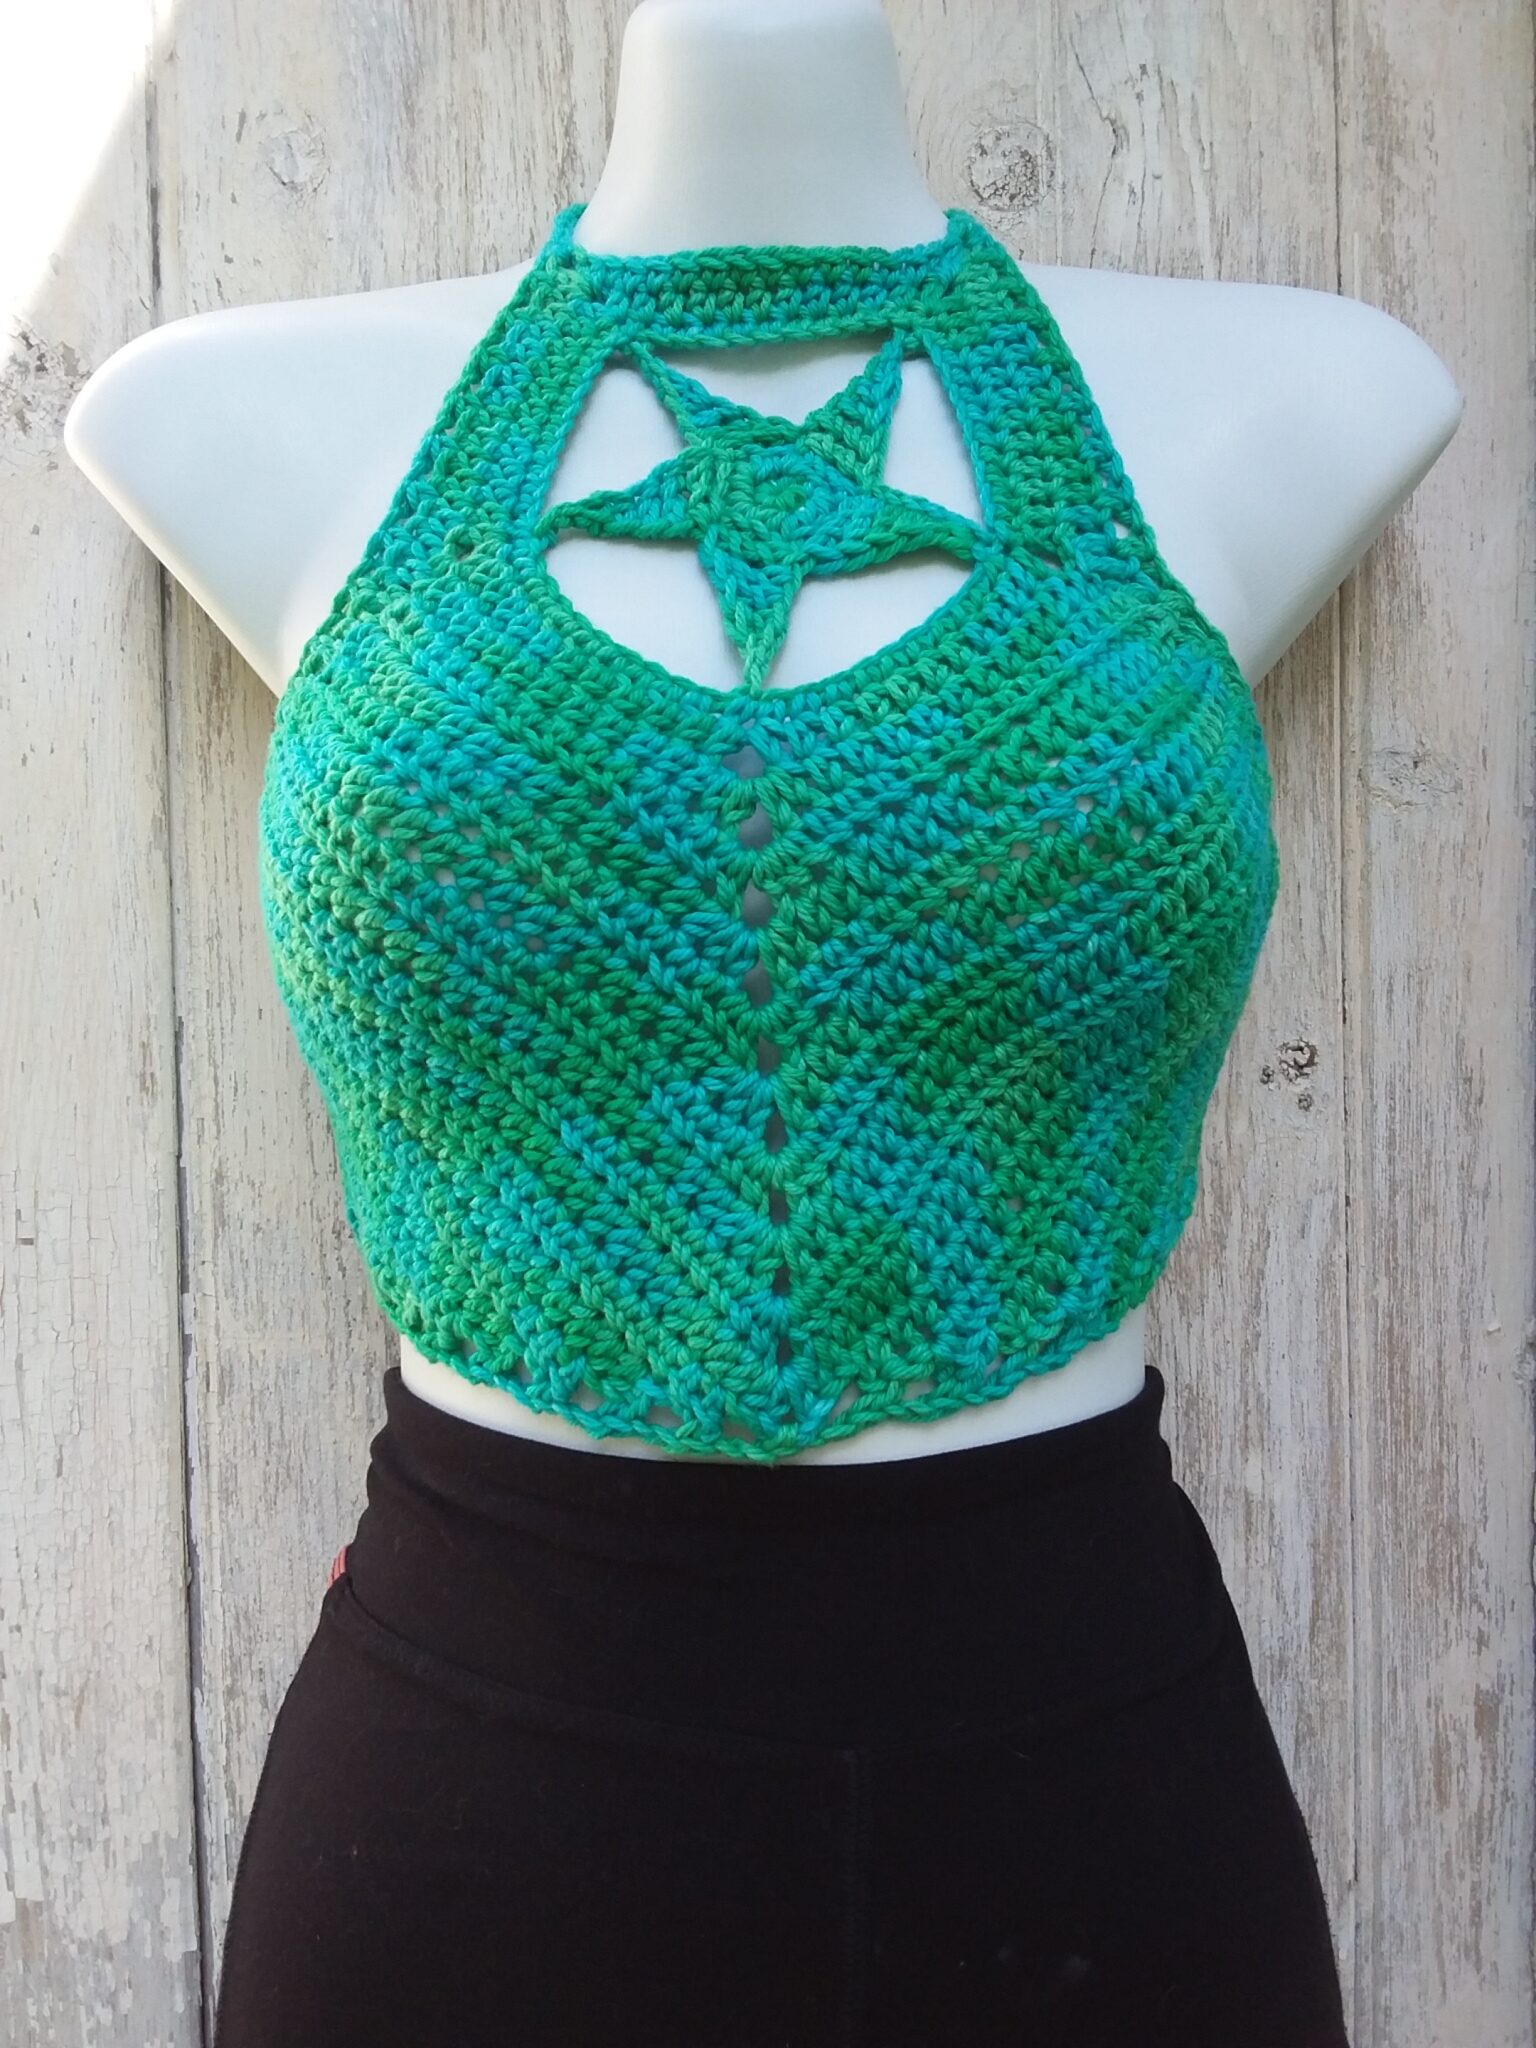 Star Crochet Crop Top Halter, Hand Dyed Organic Cotton, Cup Size